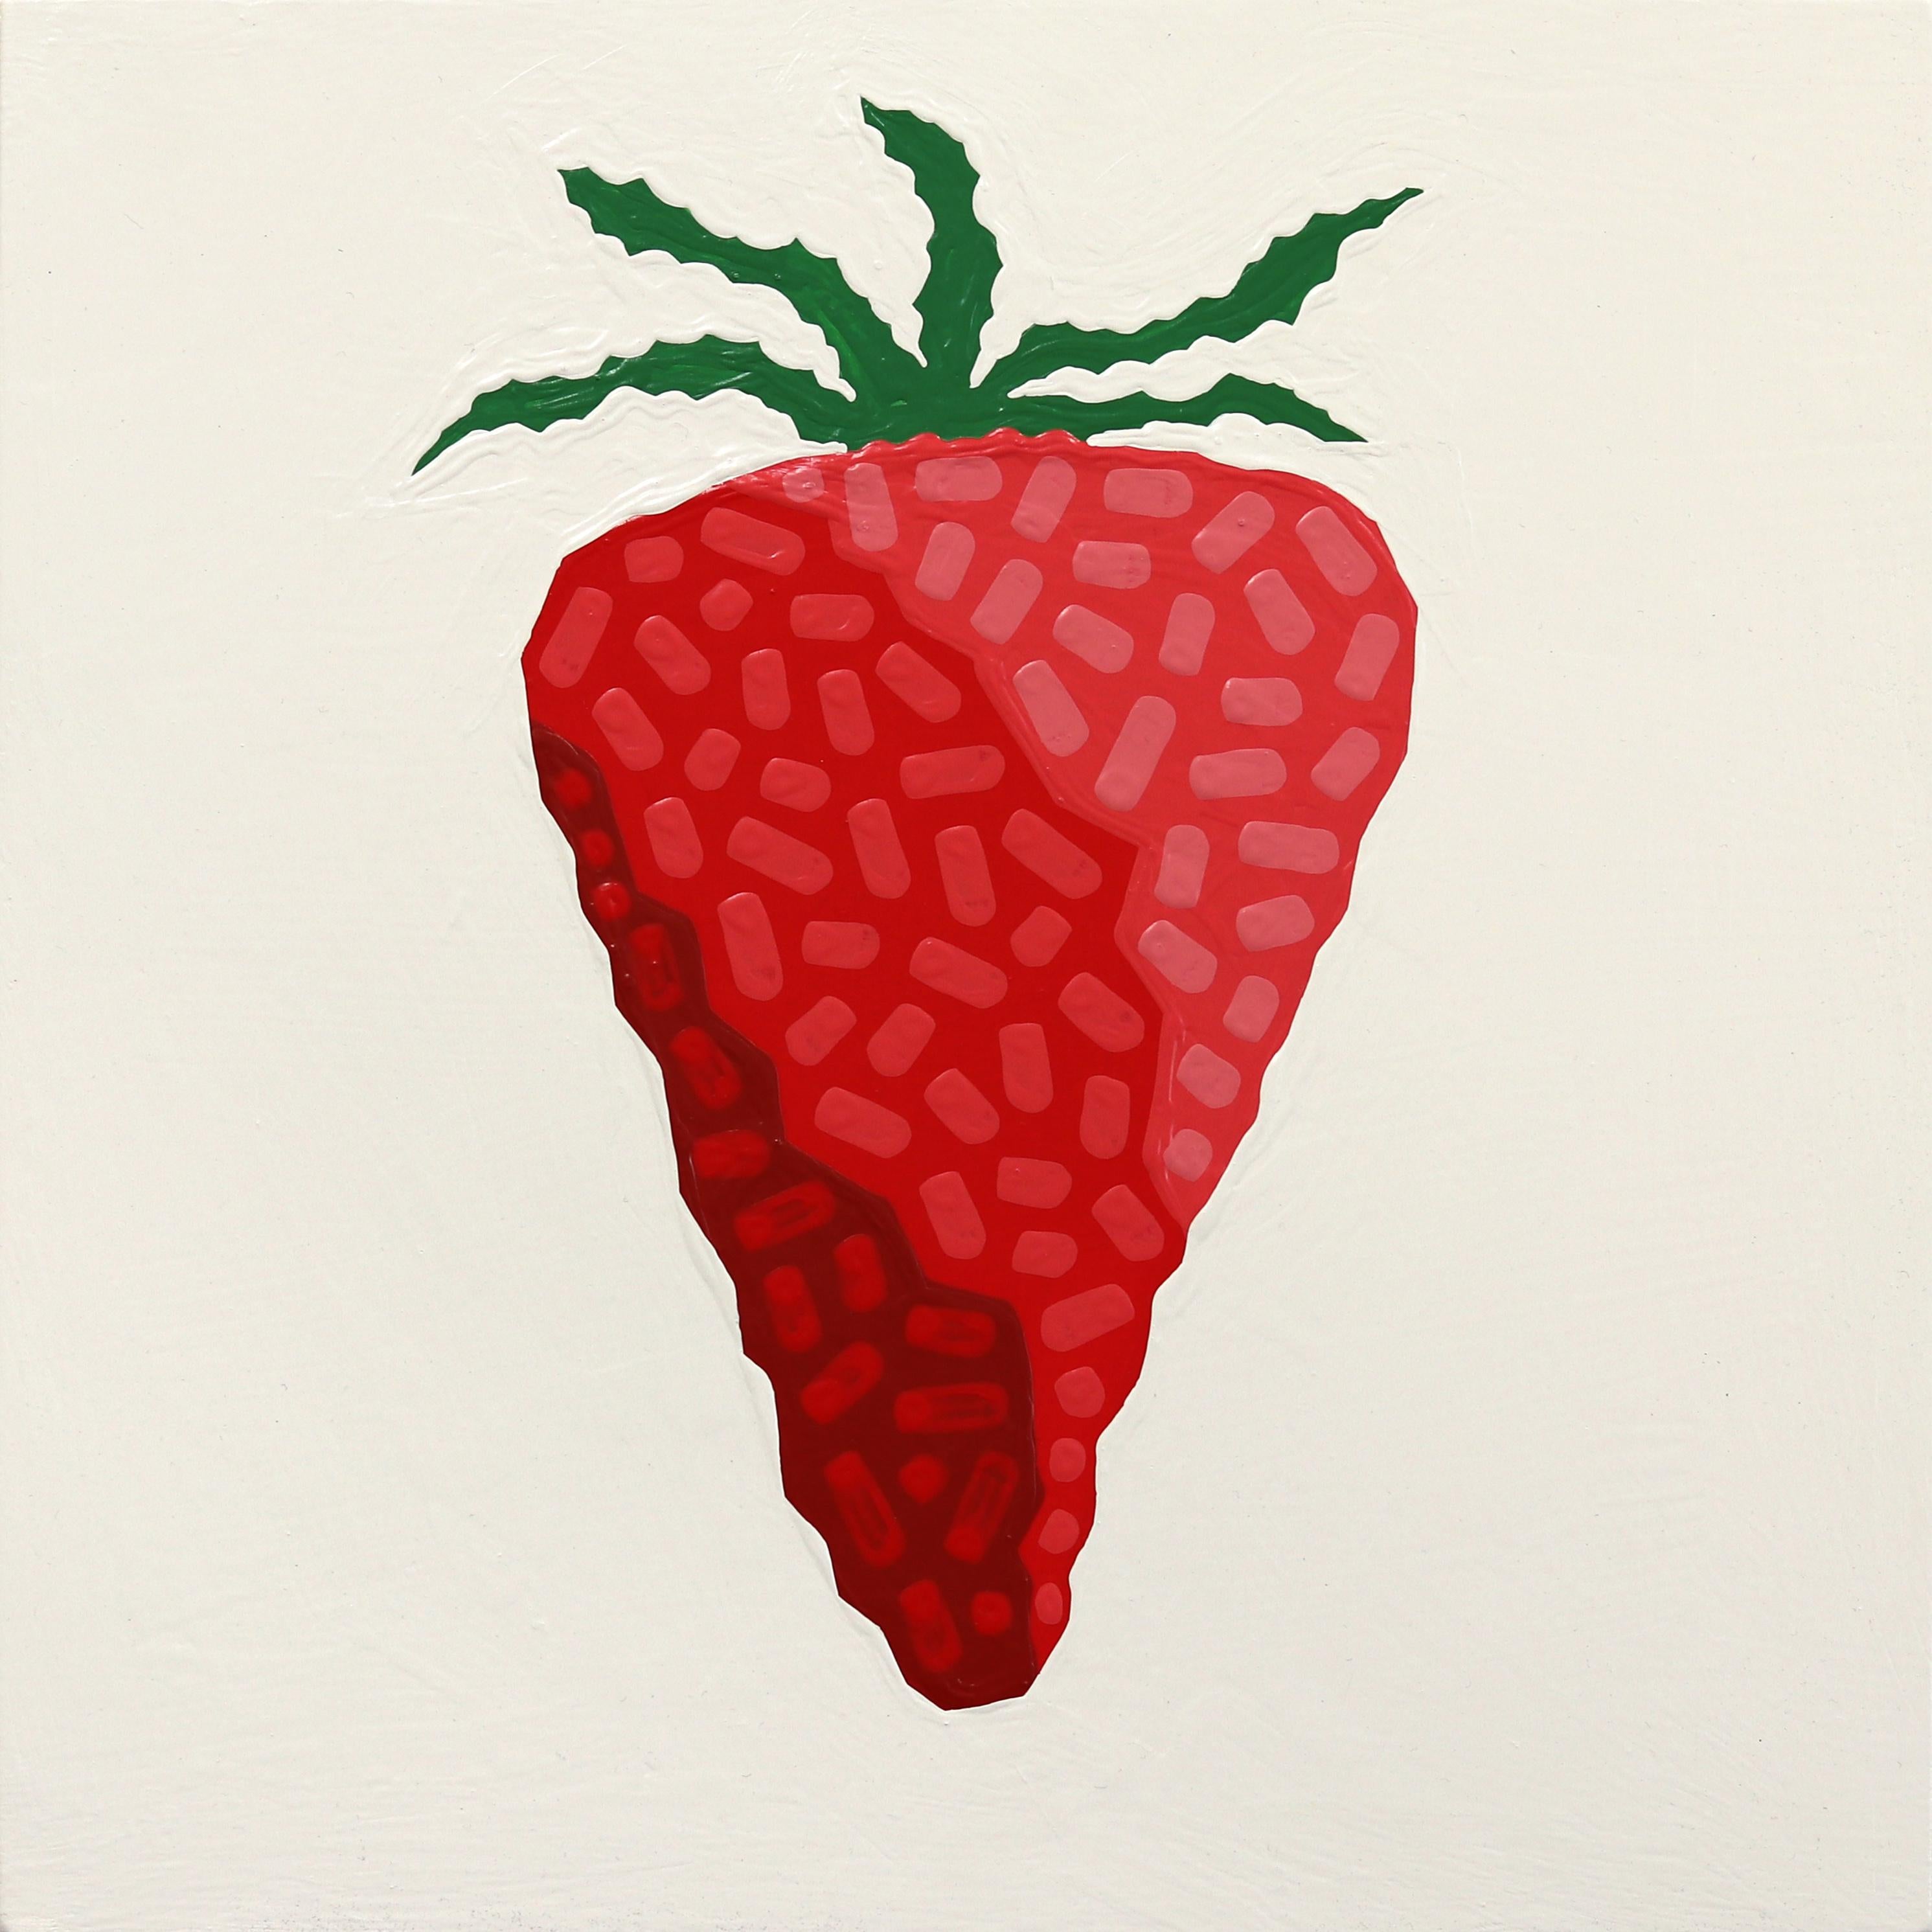 Will Beger Figurative Painting - Strawberry and Cream - Vibrant Southwest Inspired Pop Art Painting